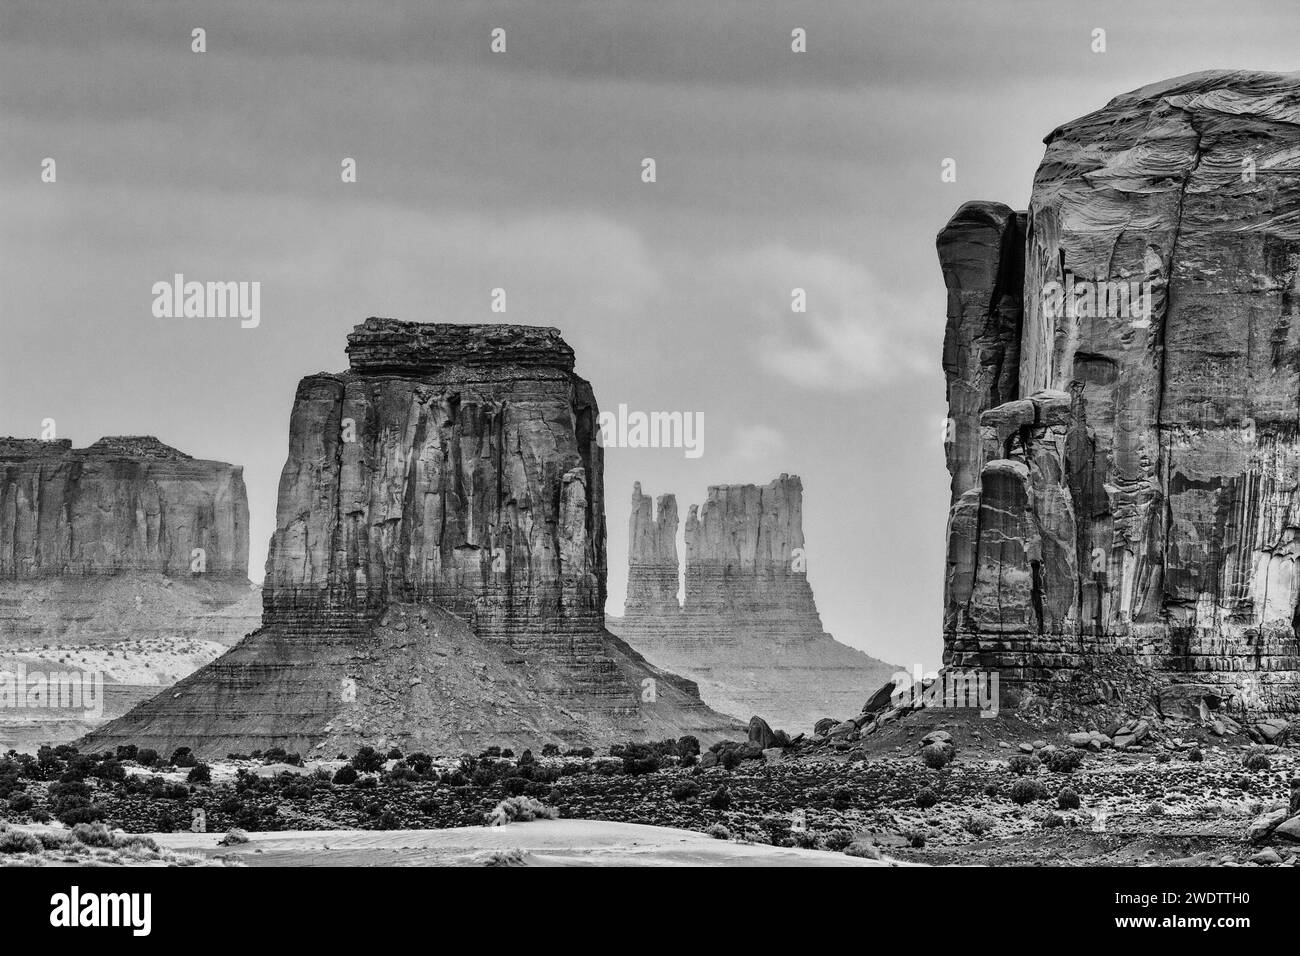 View of the monuments from the Sand Spring area in the Monument Valley Navajo Tribal Park in Arizona. Stock Photo